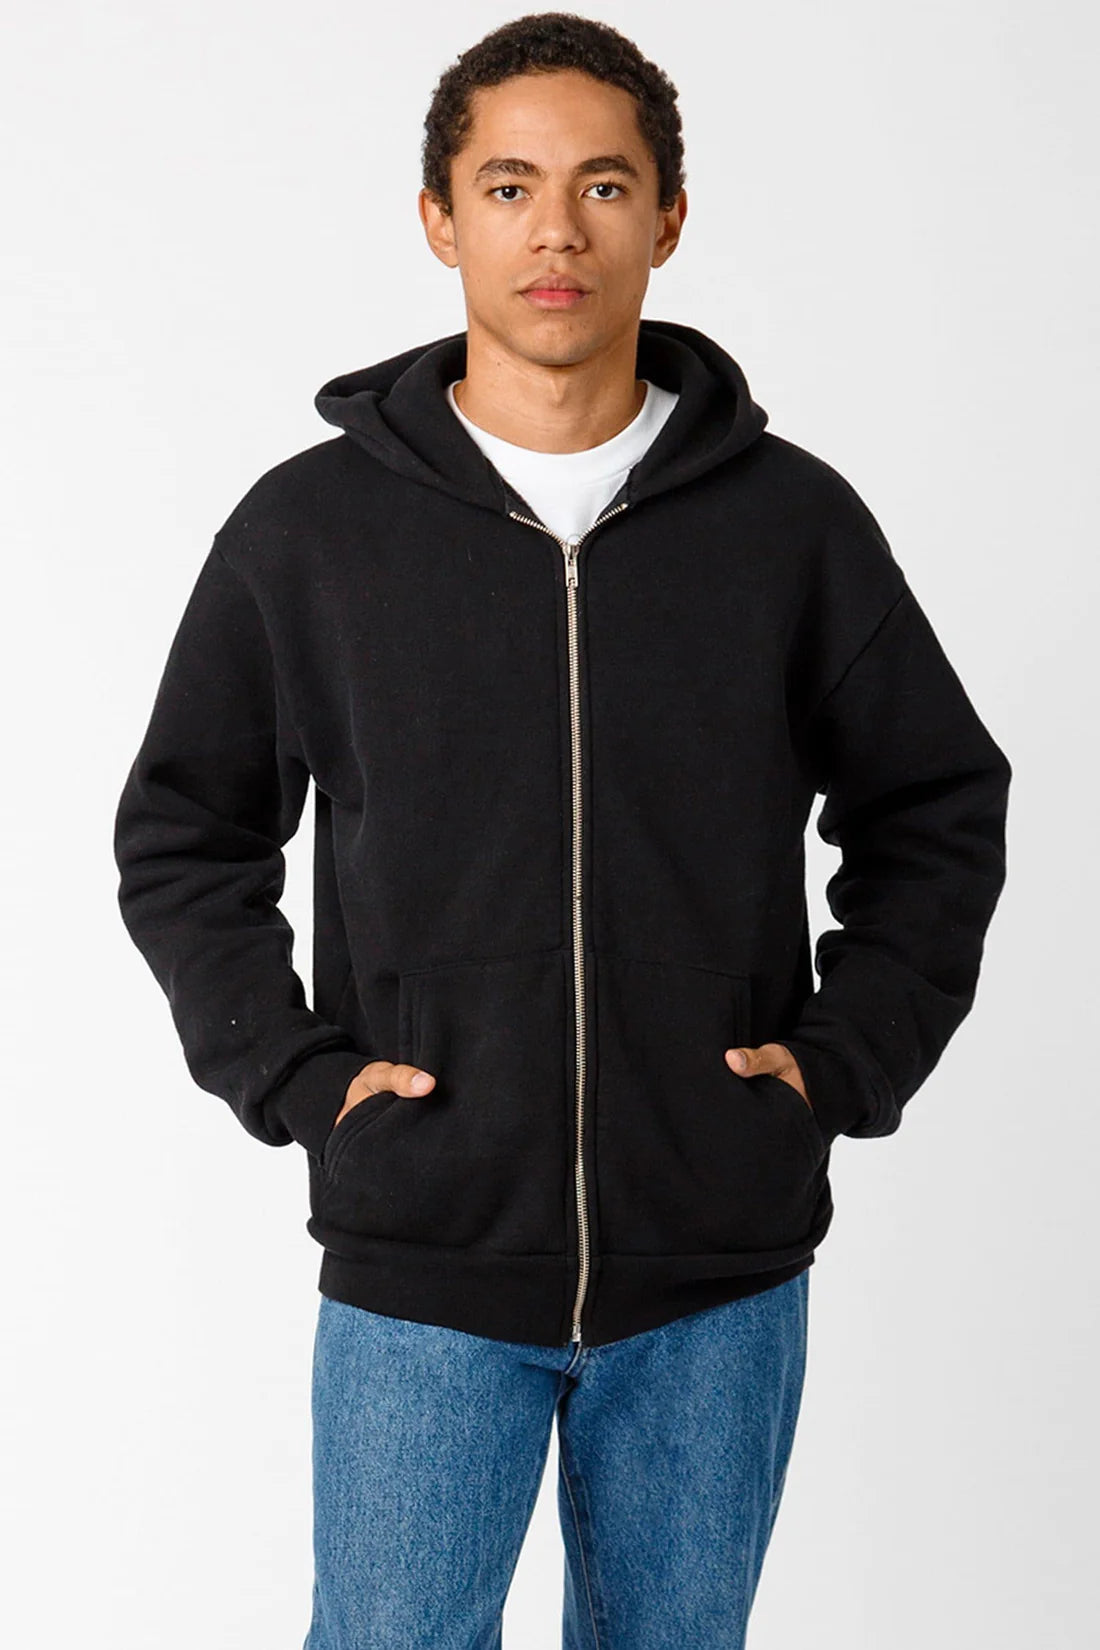  LA APPAREL (HF-09) 14oz Heavy Fleece Hooded Pullover Men's  Hoodie, Made in the USA, Ash : Clothing, Shoes & Jewelry